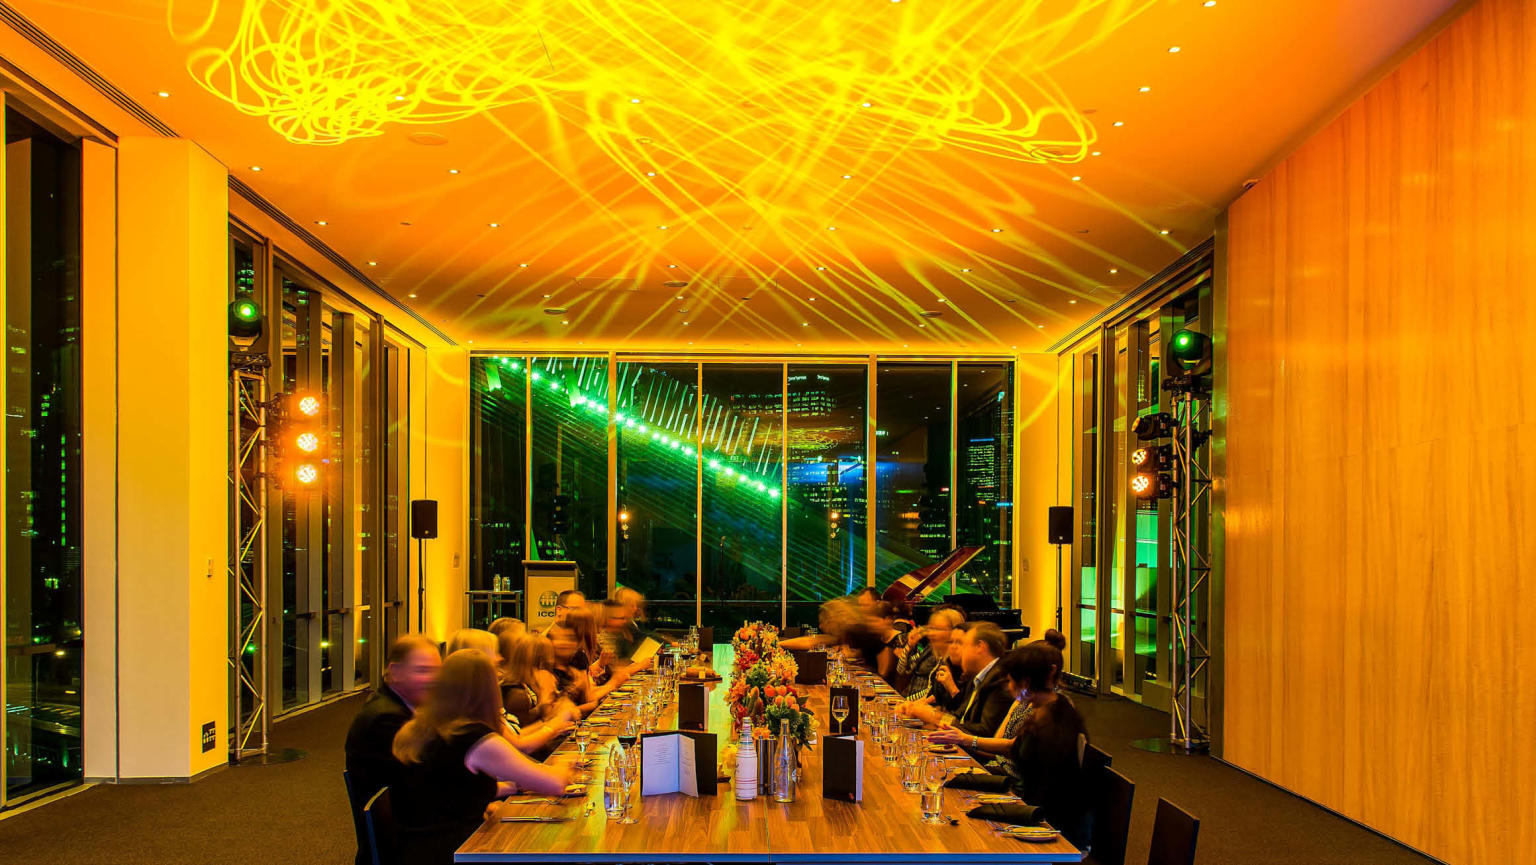 Long table with people sitting along either side in front of floor to ceiling windows. People sit at the table eating dinner with yellow lighting filling the room. 